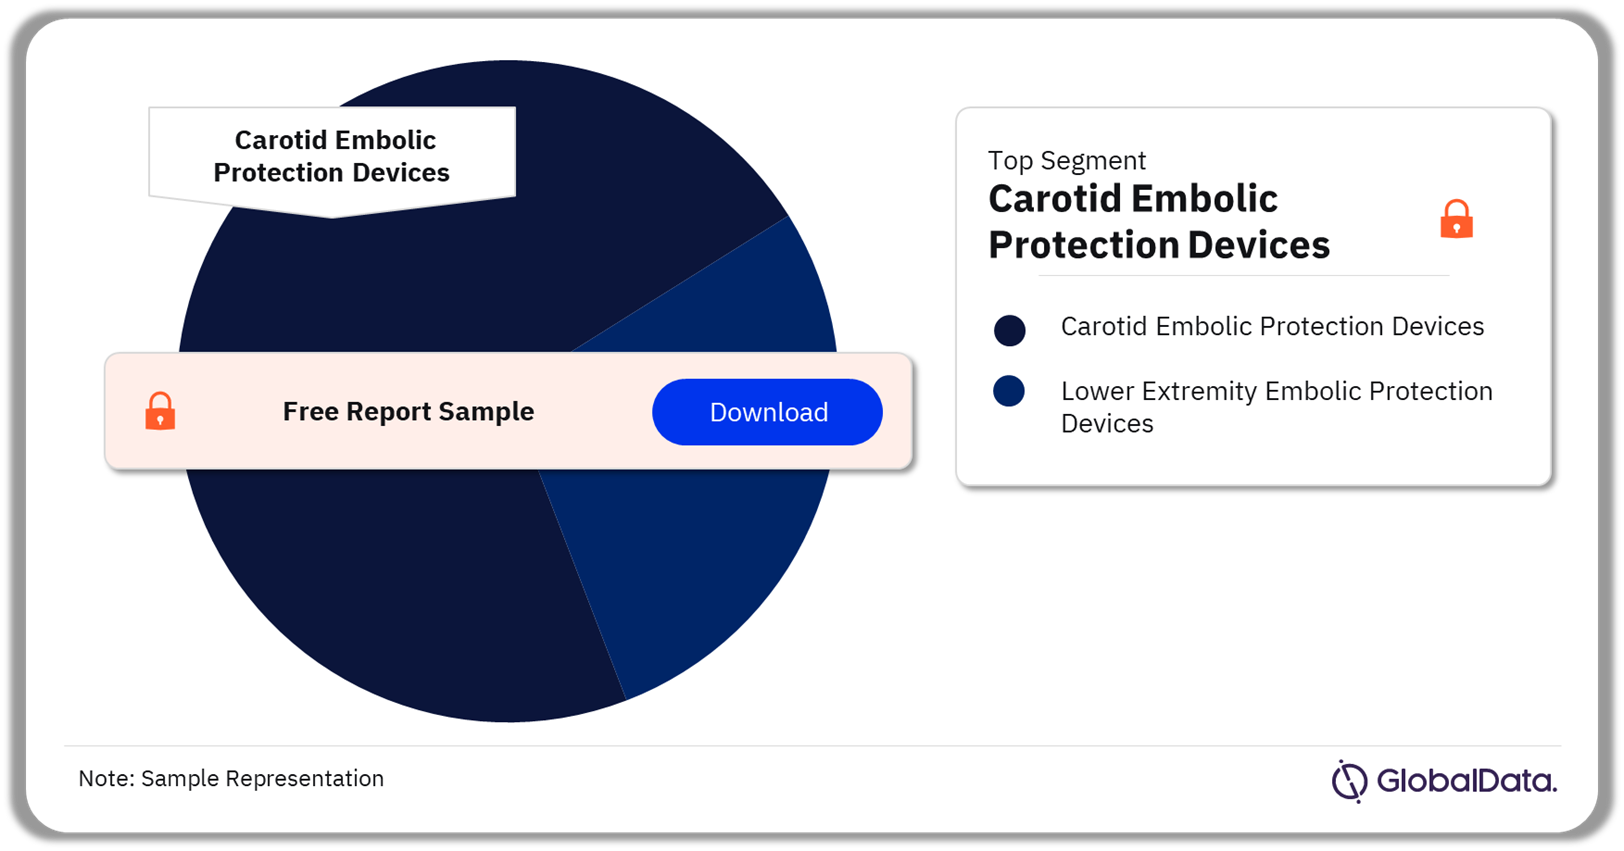 Peripheral Embolic Protection Devices Market Analysis by Segments, 2023 (%)